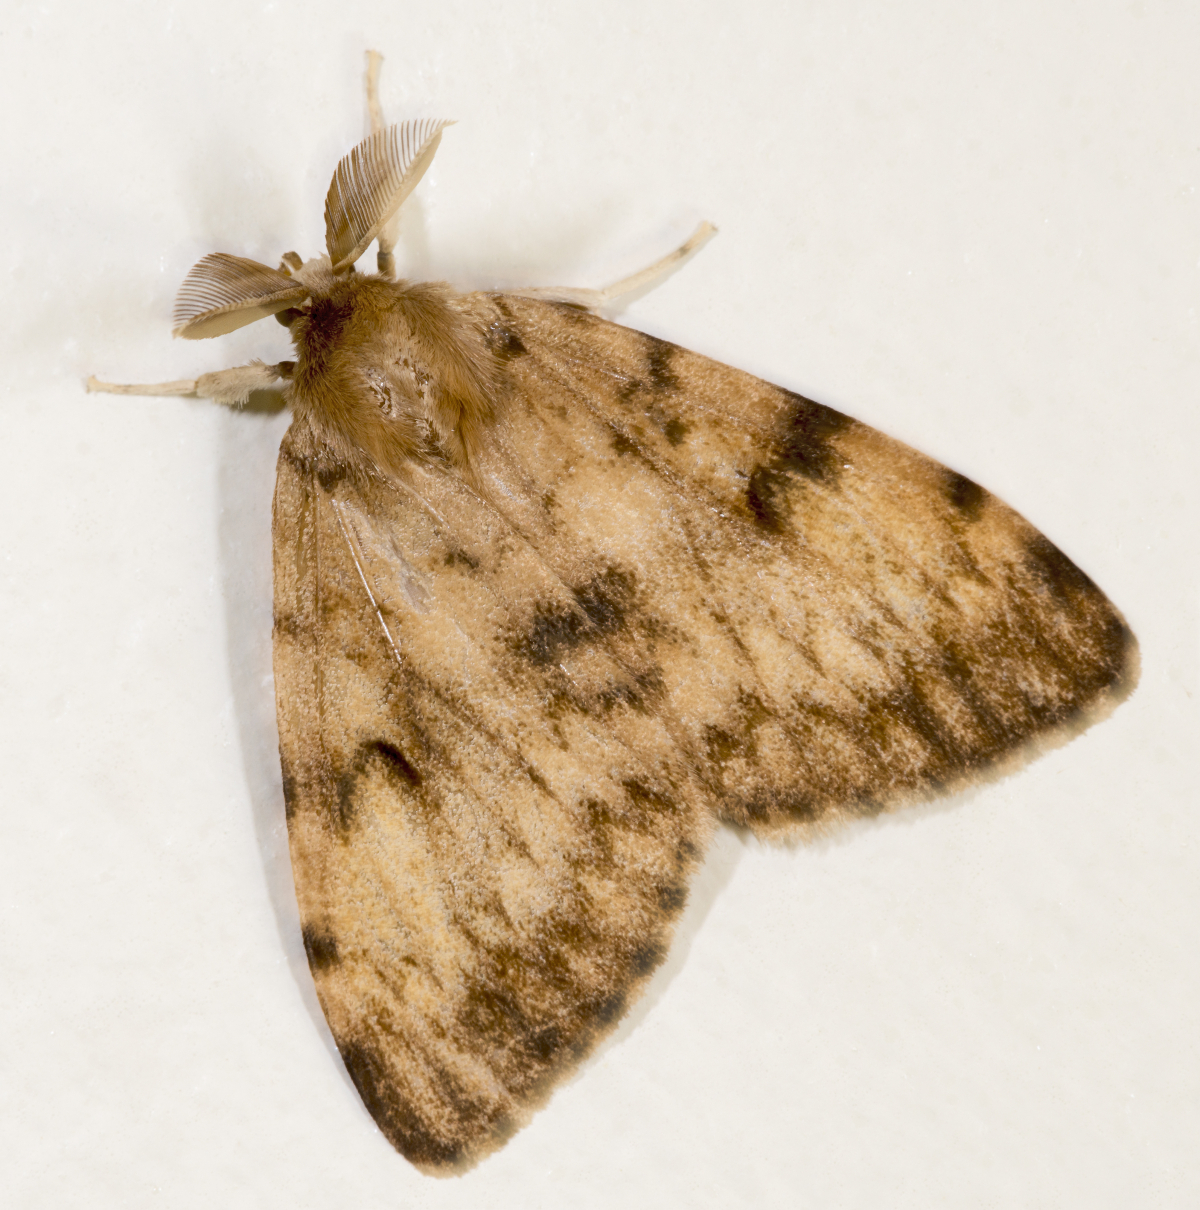 The presence of a devastating invasive moth has been detected in Haywood County.